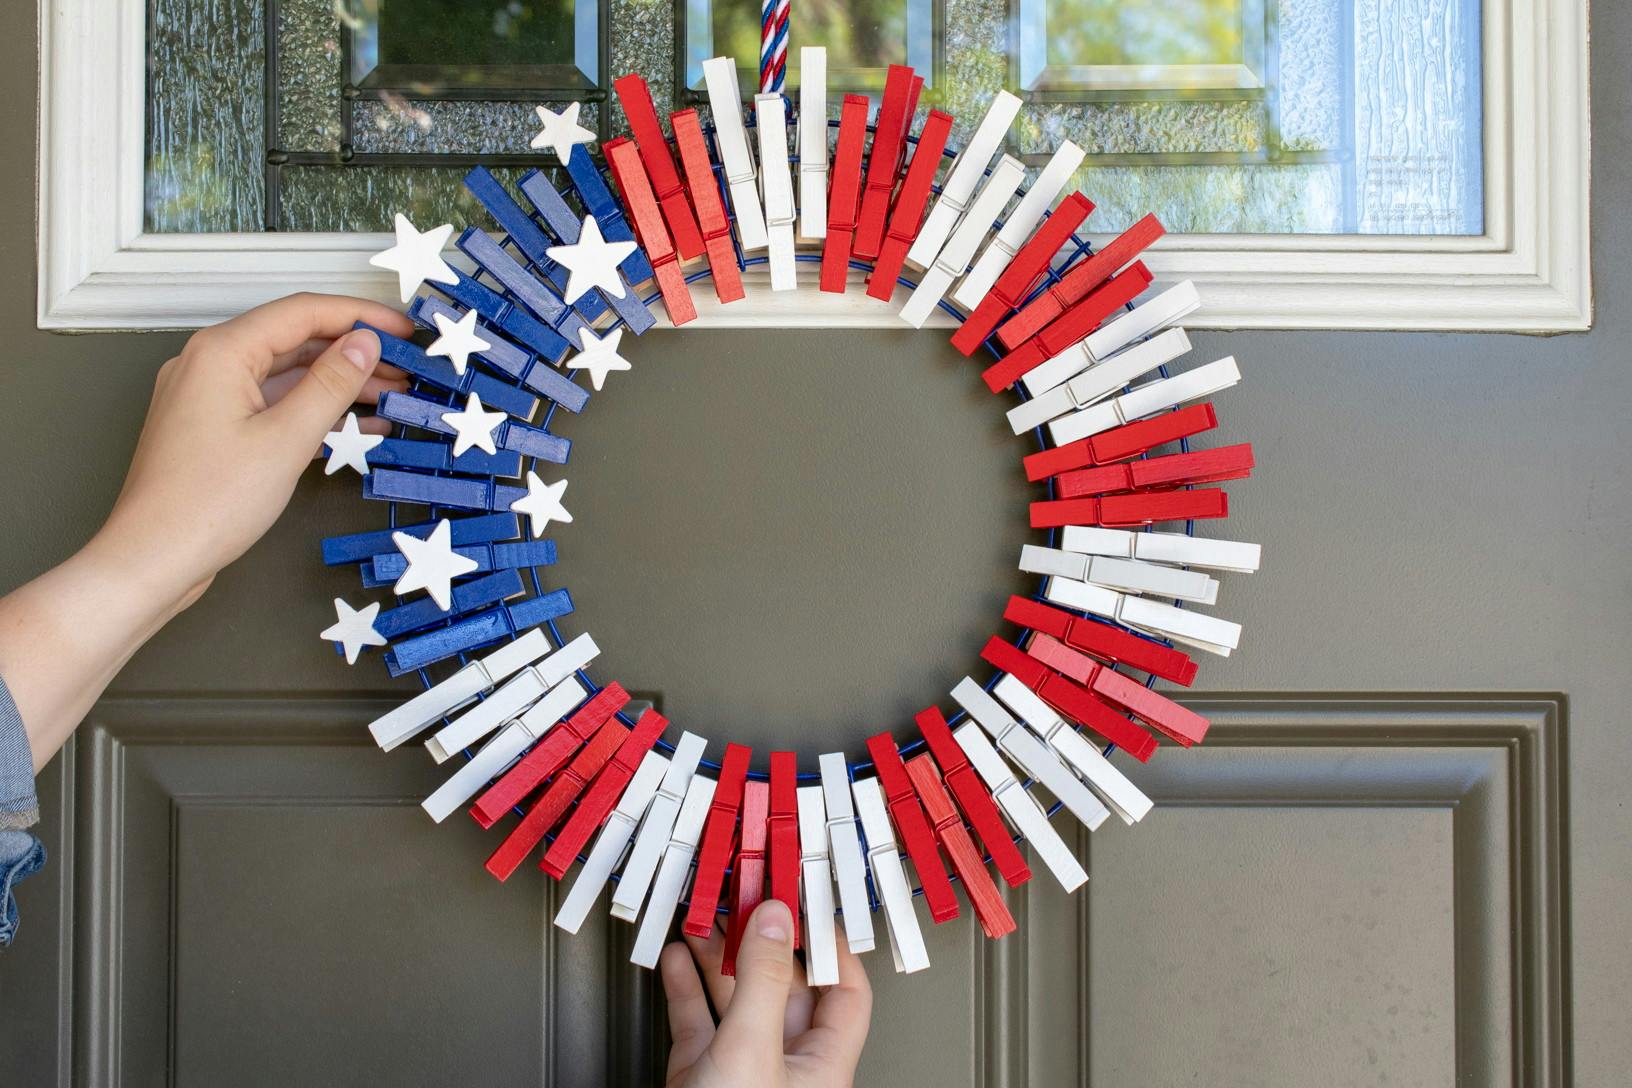 A person hanging a wreath made of red, white, and blue clothespins on their front door.